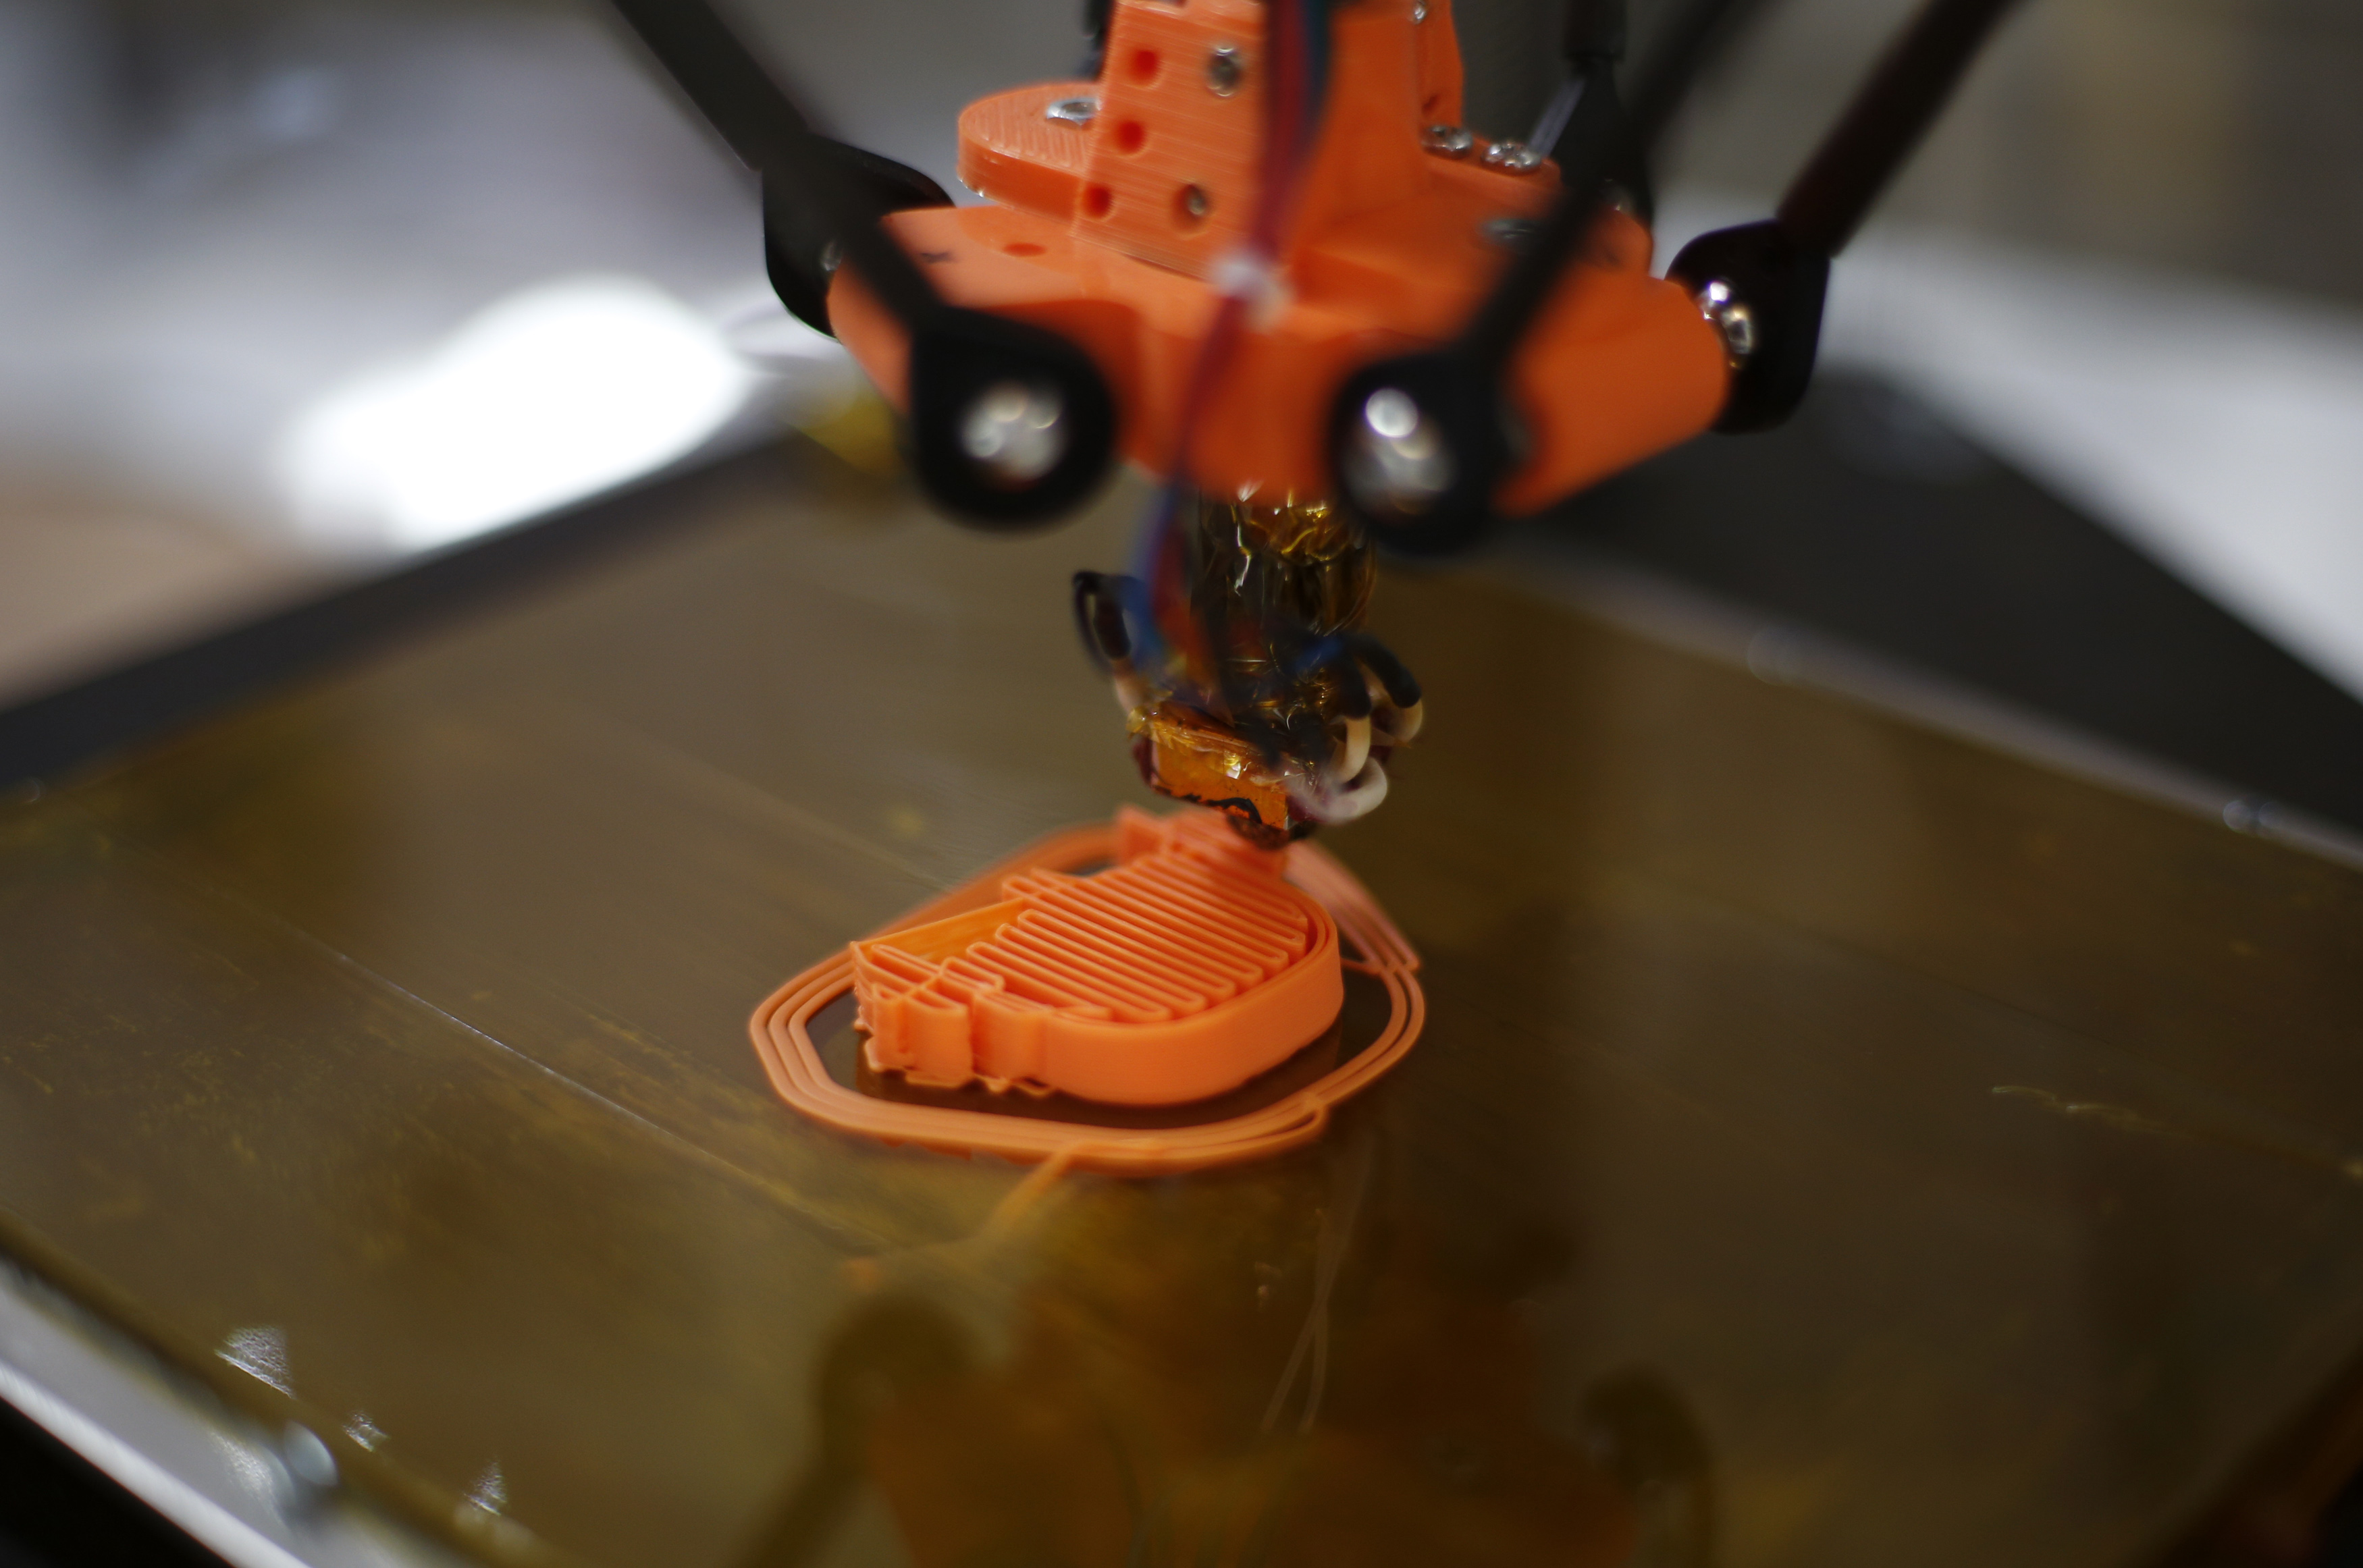 A 3-D printer in action.